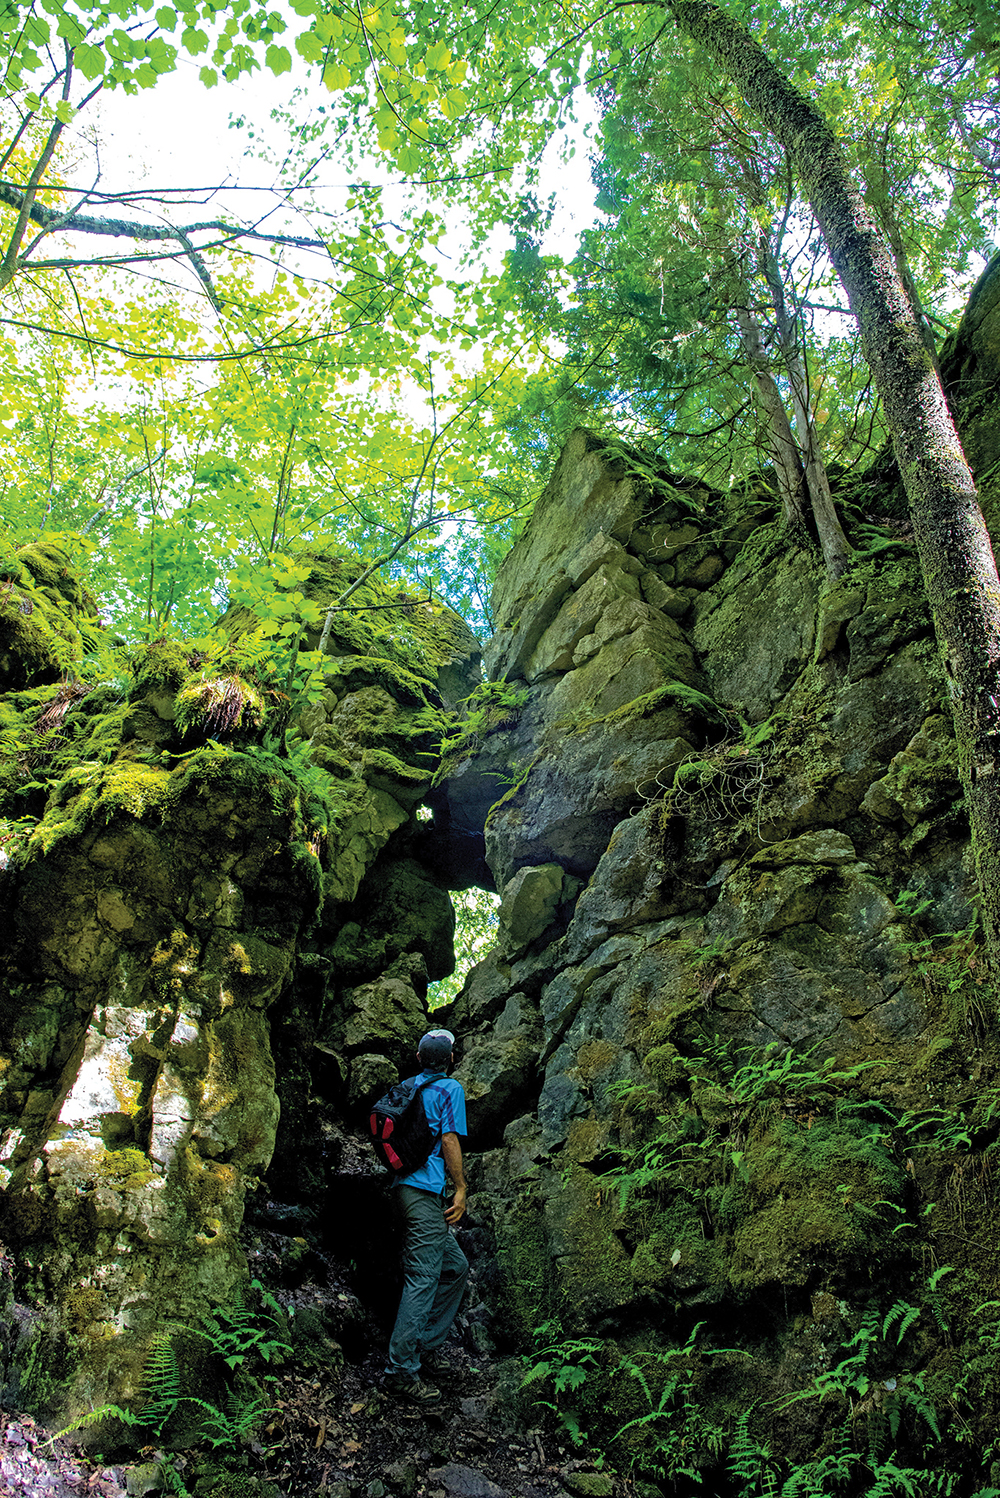 Barry Zimmermann takes in one of the stunning rock formations on the upper part of the trail